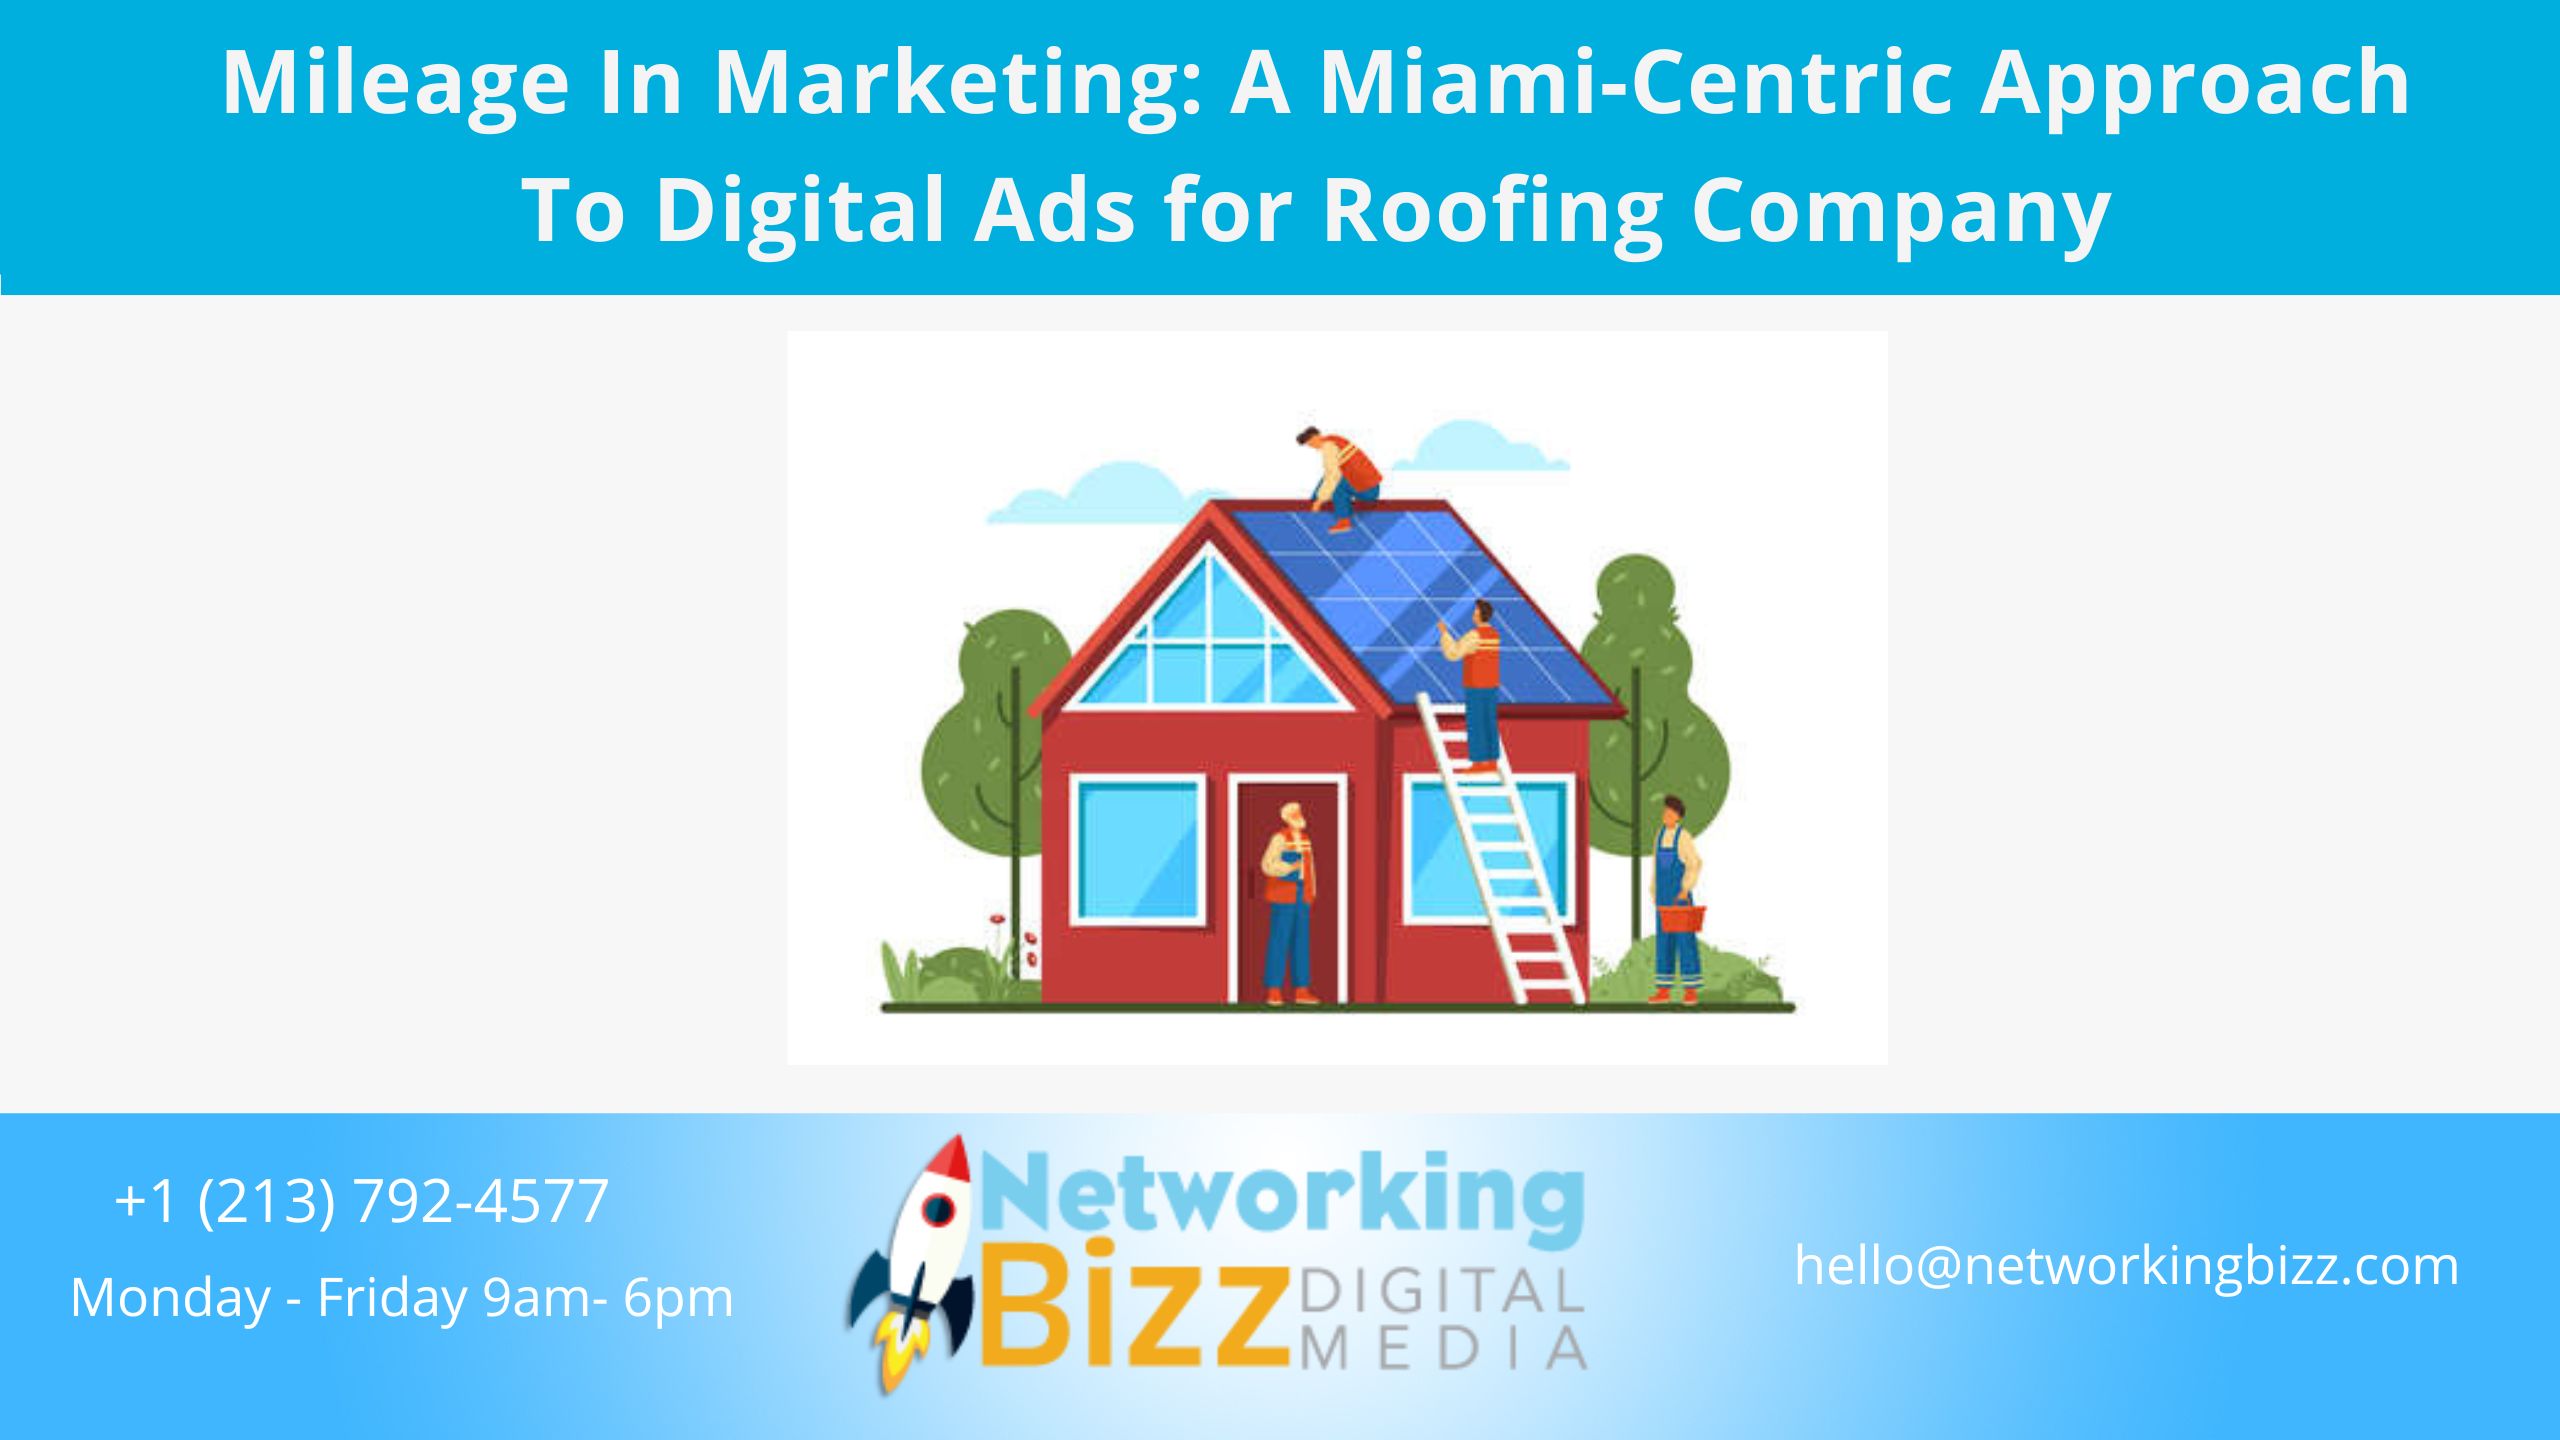 Mileage In Marketing: A Miami-Centric Approach To Digital Ads for Roofing Company